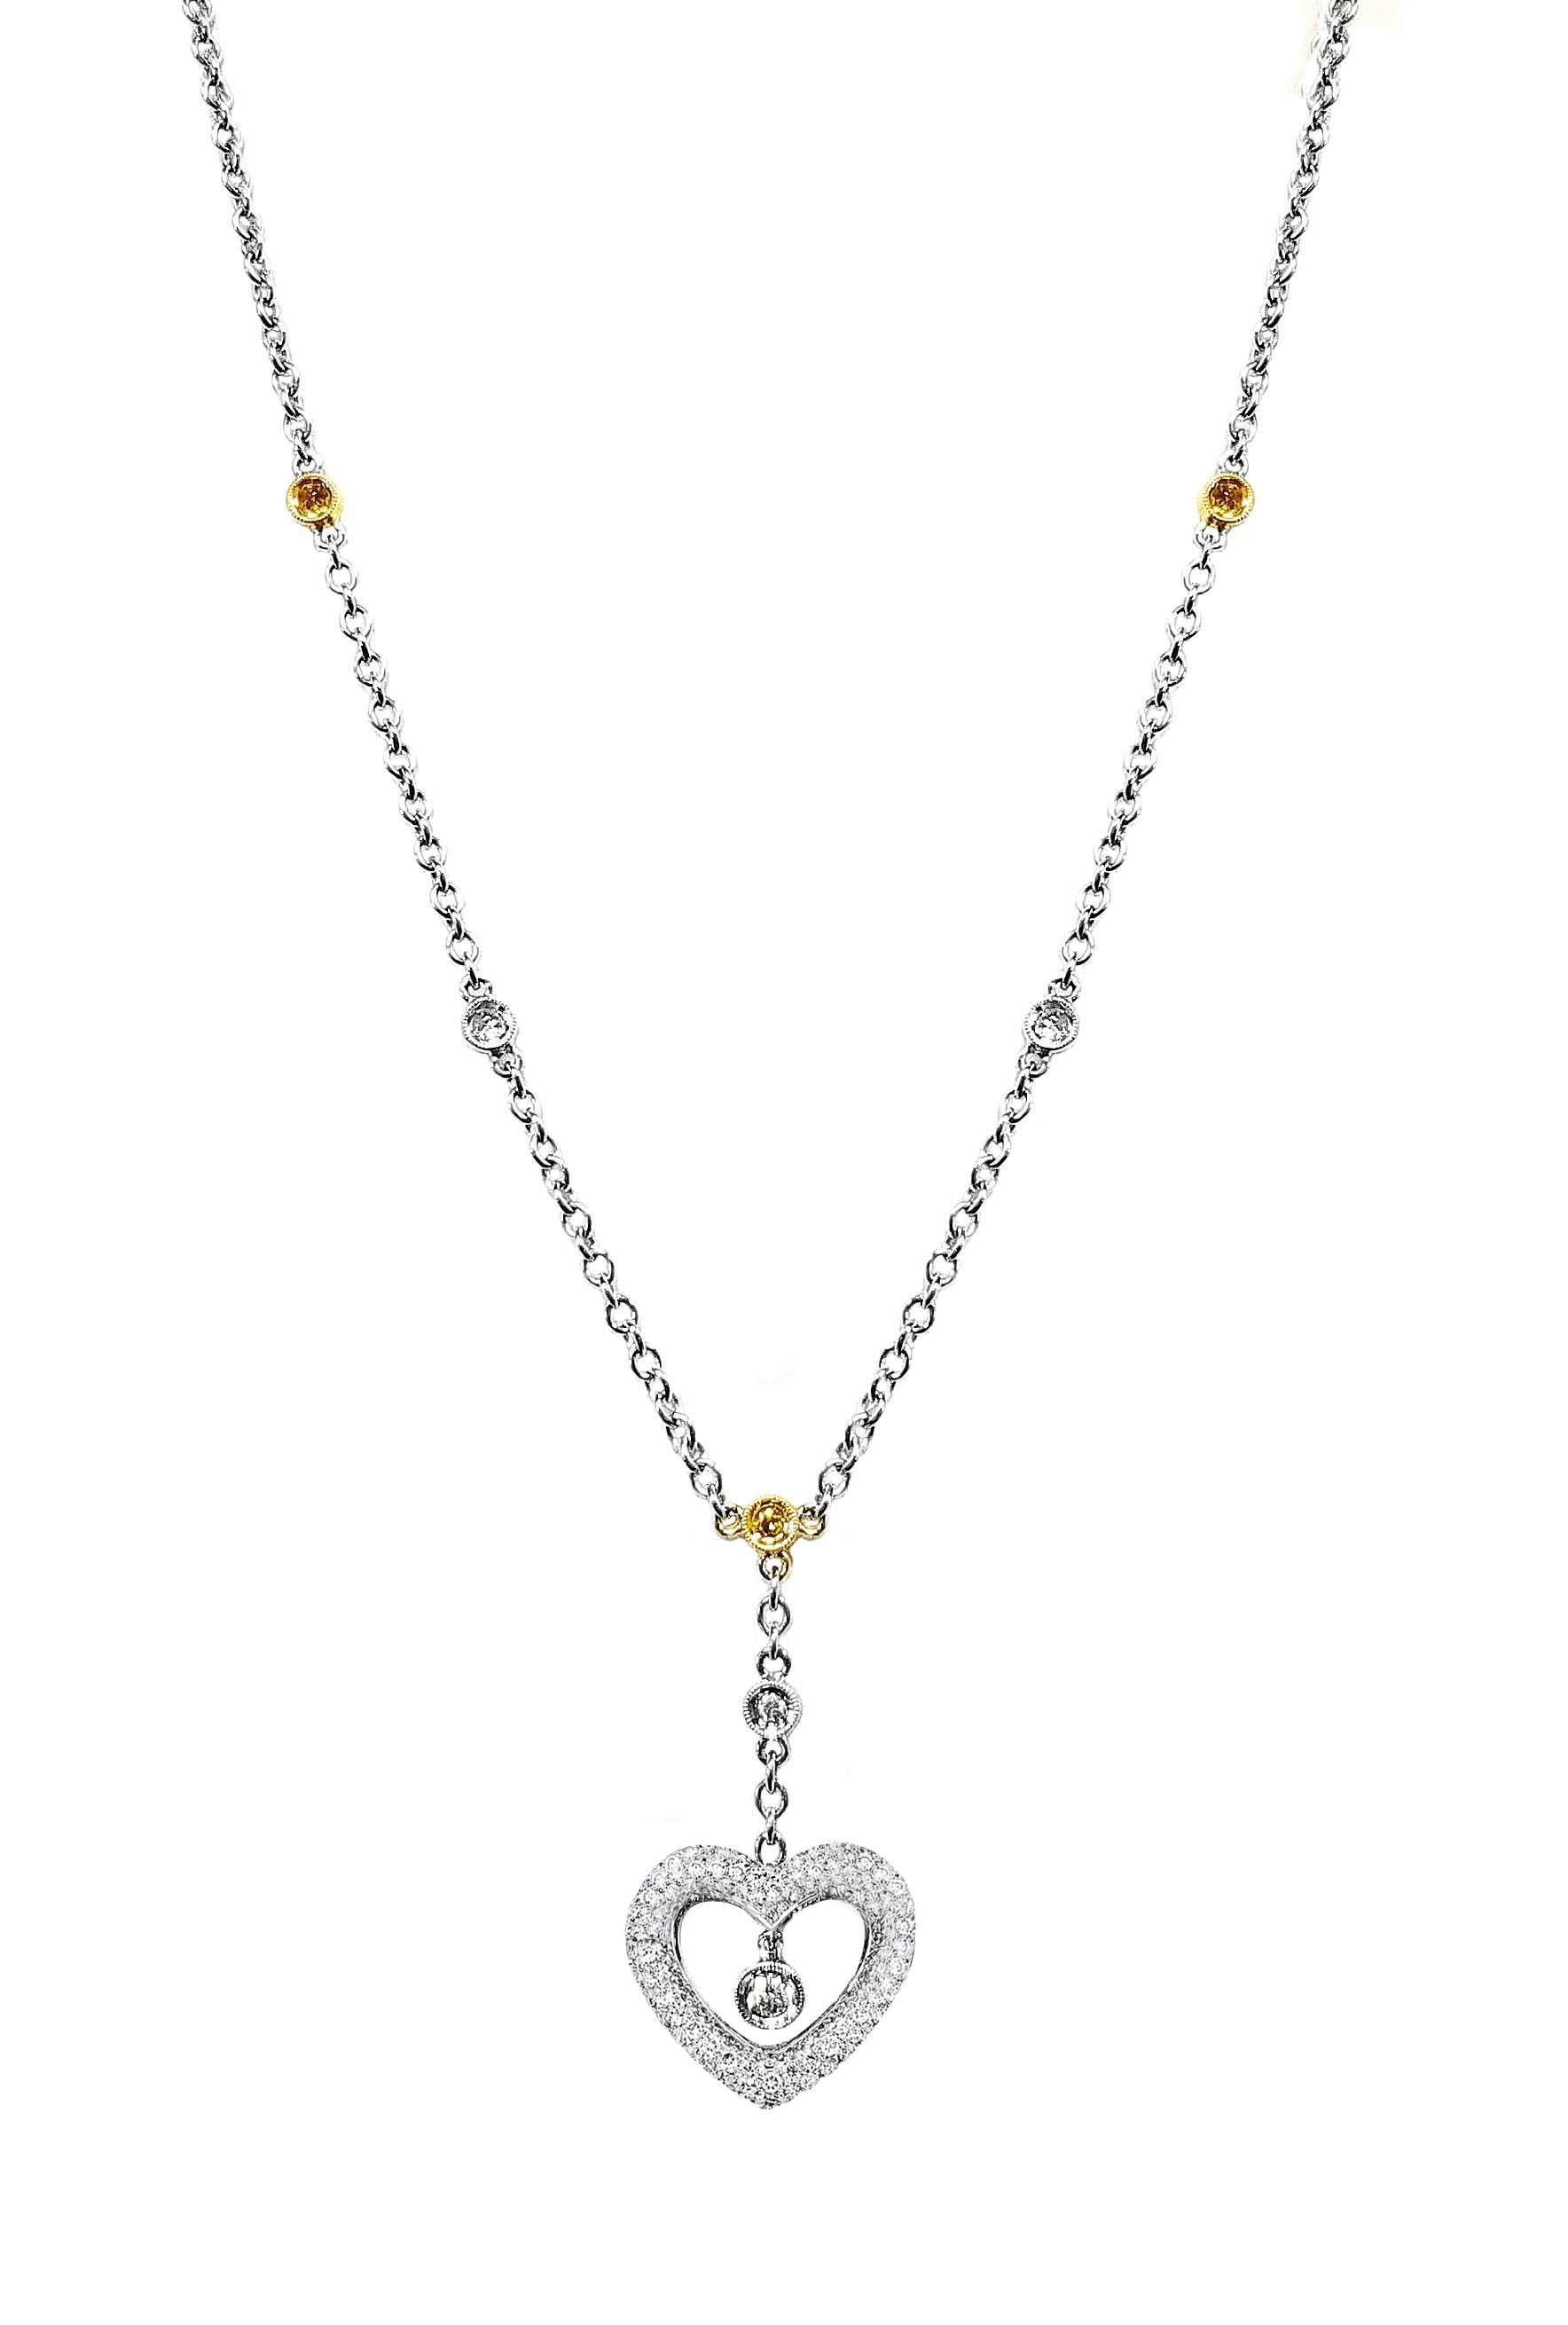 Artisan Vitolo 18 Karat Gold Necklace with Diamond Heart and Bezels For Sale